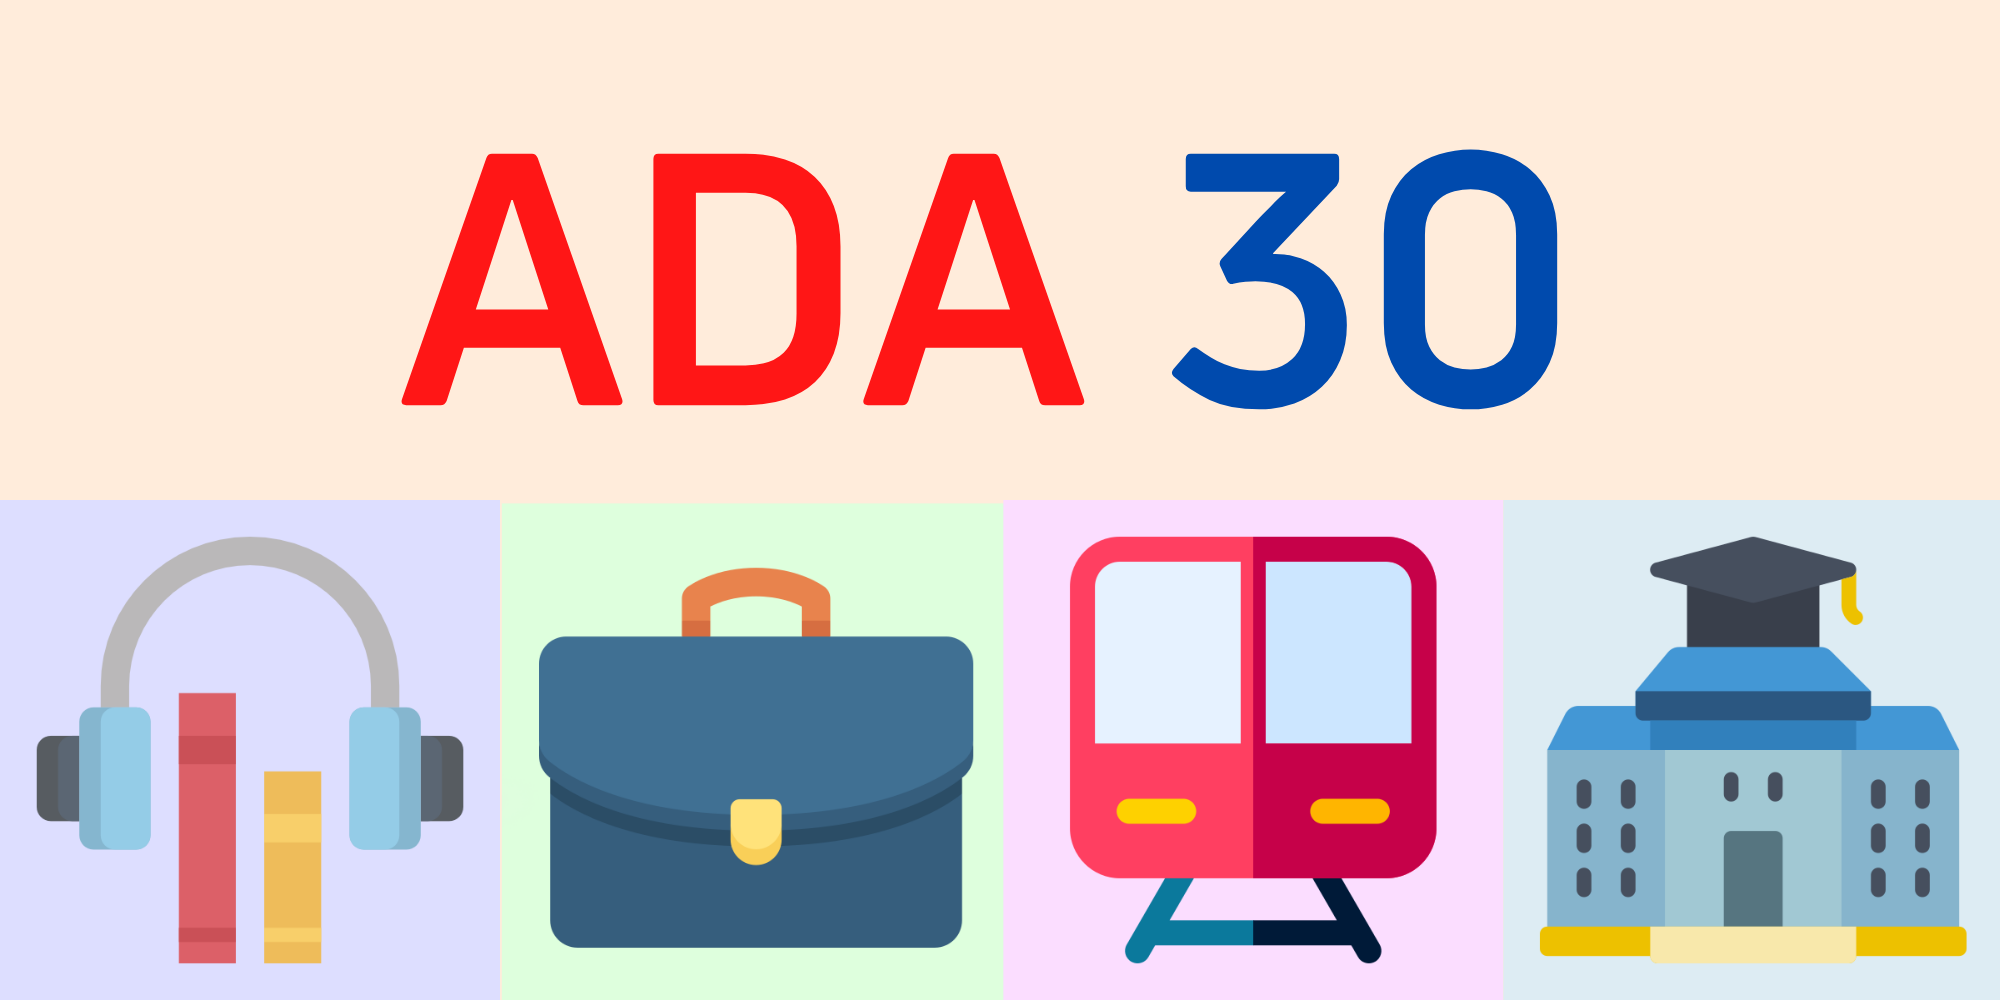 ADA 30 with icons a book and headphones, a brief case, a train, and a school building with a graduation cap.